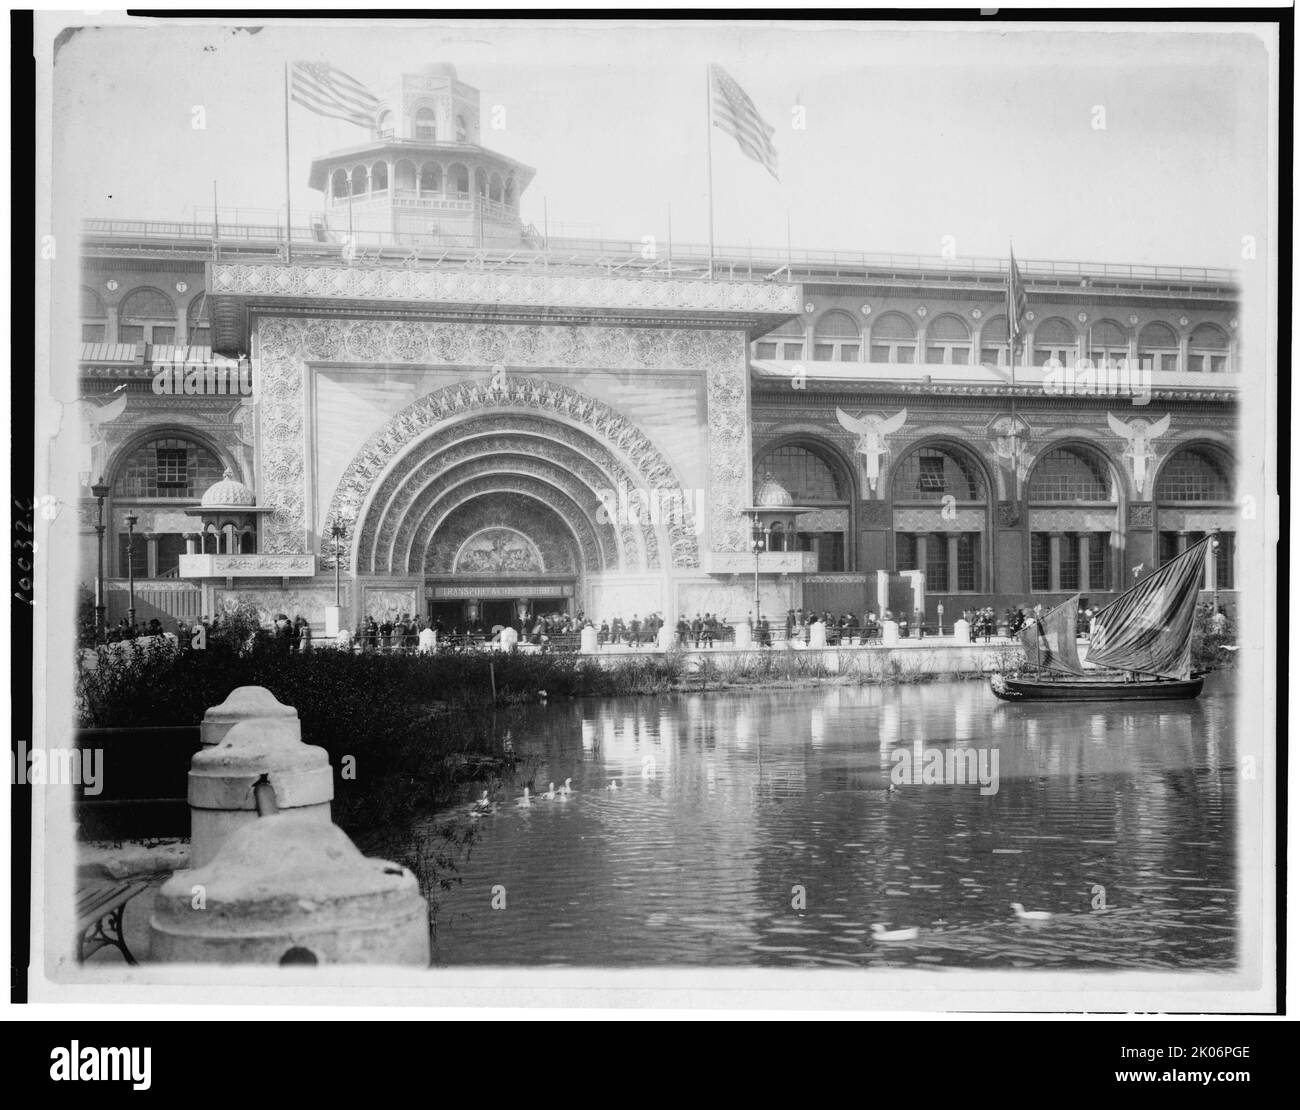 Transportation exhibit building with canal boat and ducks on canal(?) in foreground at the World's Columbian Exposition, Chicago, Illinois, 1893. Stock Photo